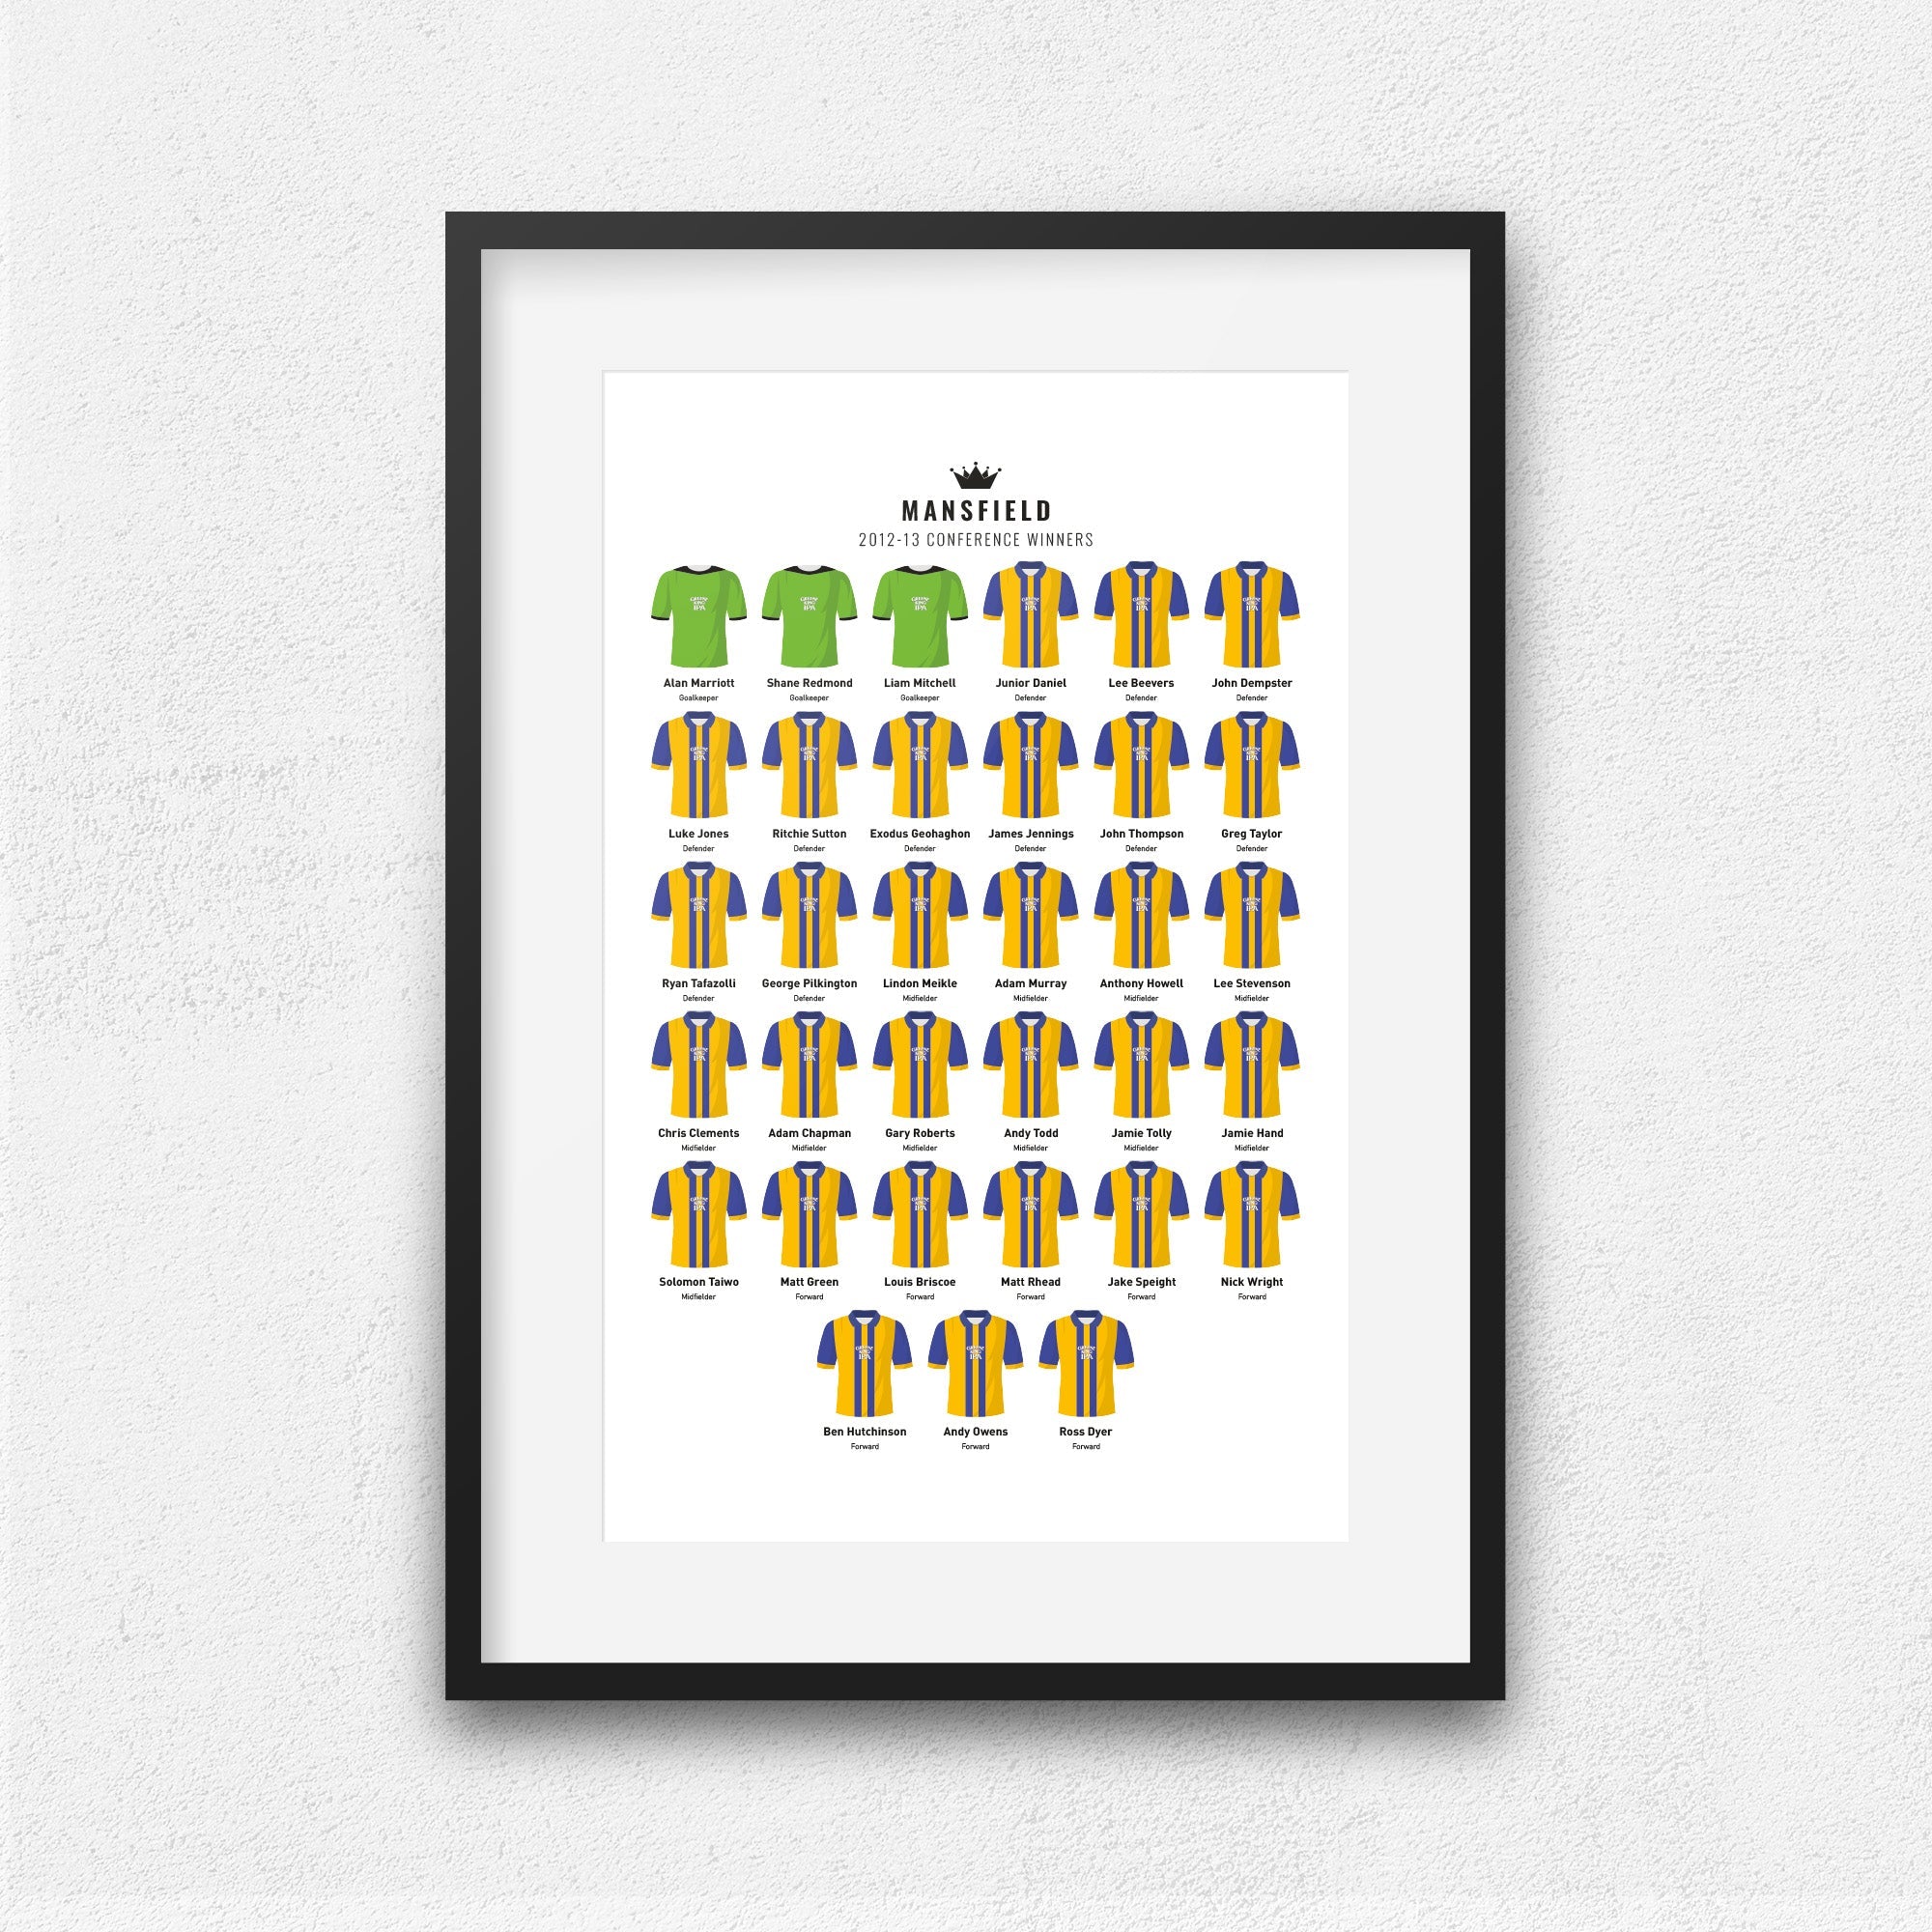 Mansfield 2013 Conference Winners Football Team Print Good Team On Paper